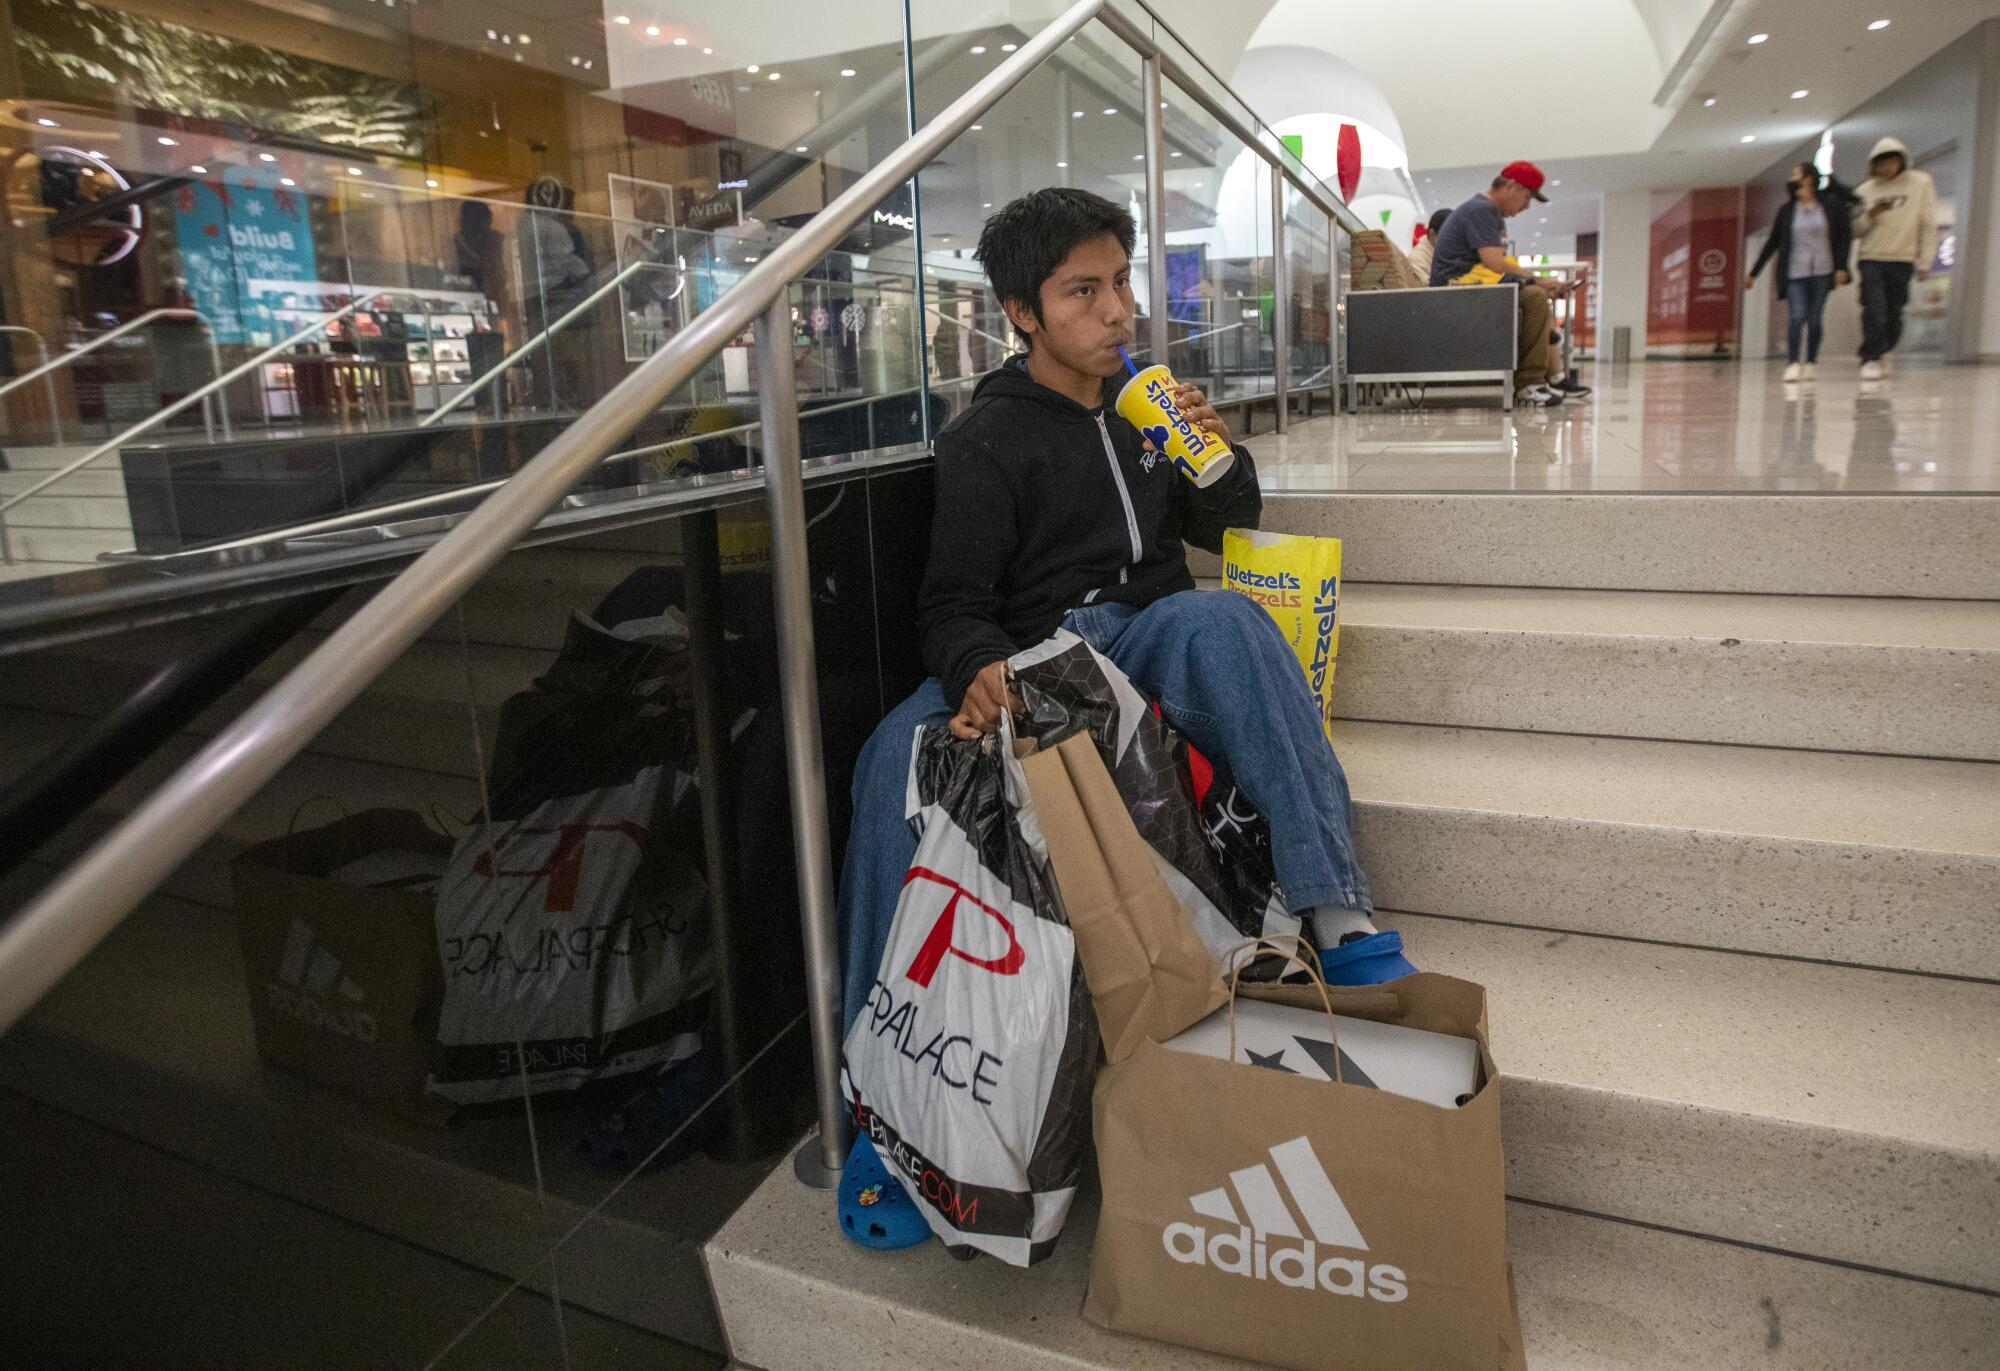 Sitting down on stairs, Pablo Santiago, 14, takes a break from shopping on Black Friday at the Glendale Galleria.